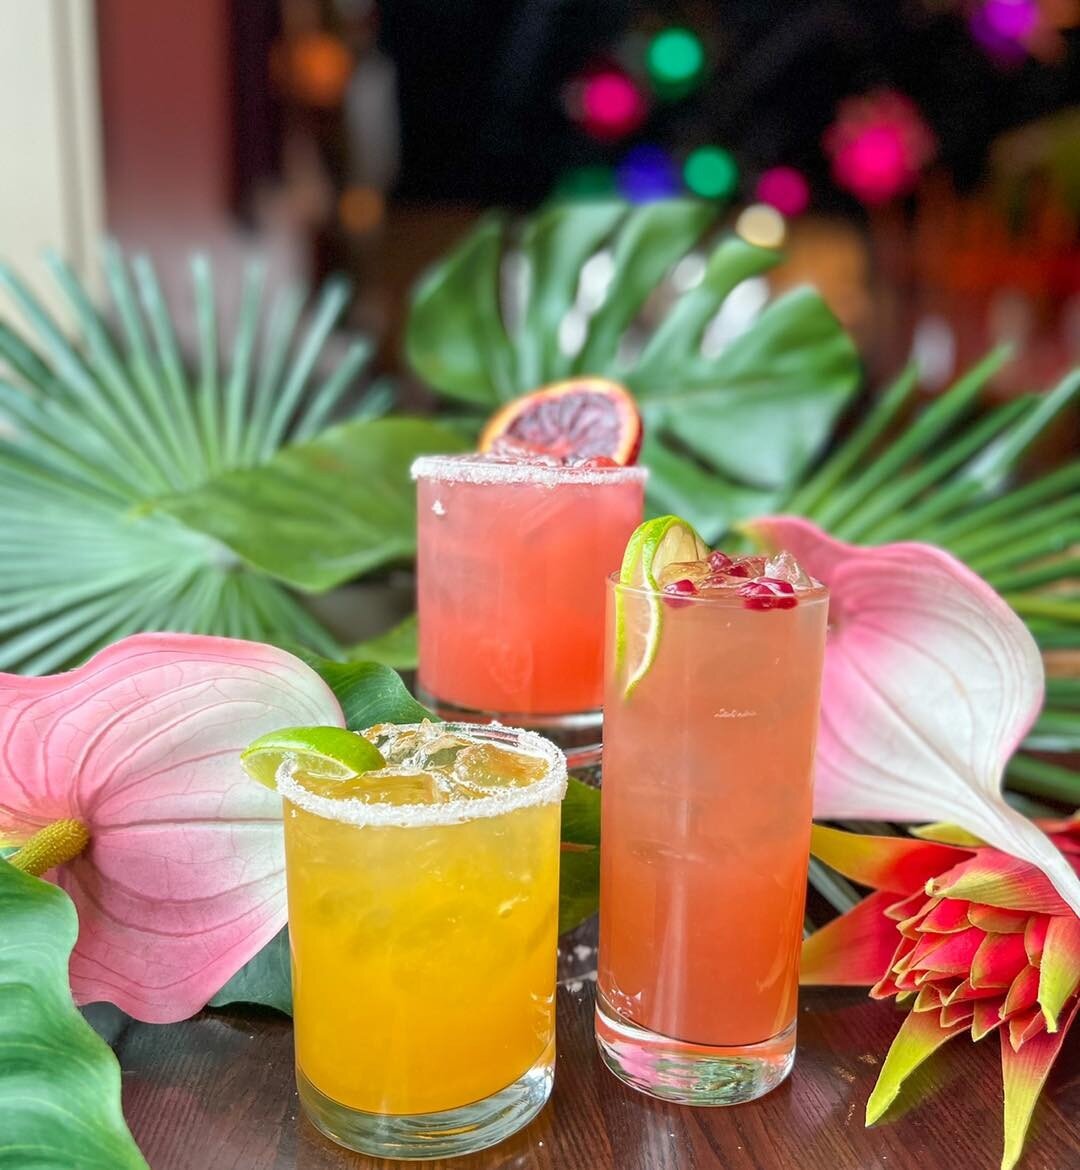 Some delicious new cocktails just hit the menu! (L-R) Passion Fruit Margarita, Smokey Blood Orange Margarita, Pink Passion Paloma 🍹 Cheers! 
.
.
.
.
.
#mexicanfood #authenticmexicanfood #authenticmexicancuisine #mexicanrestaurant #westconcordma #wes